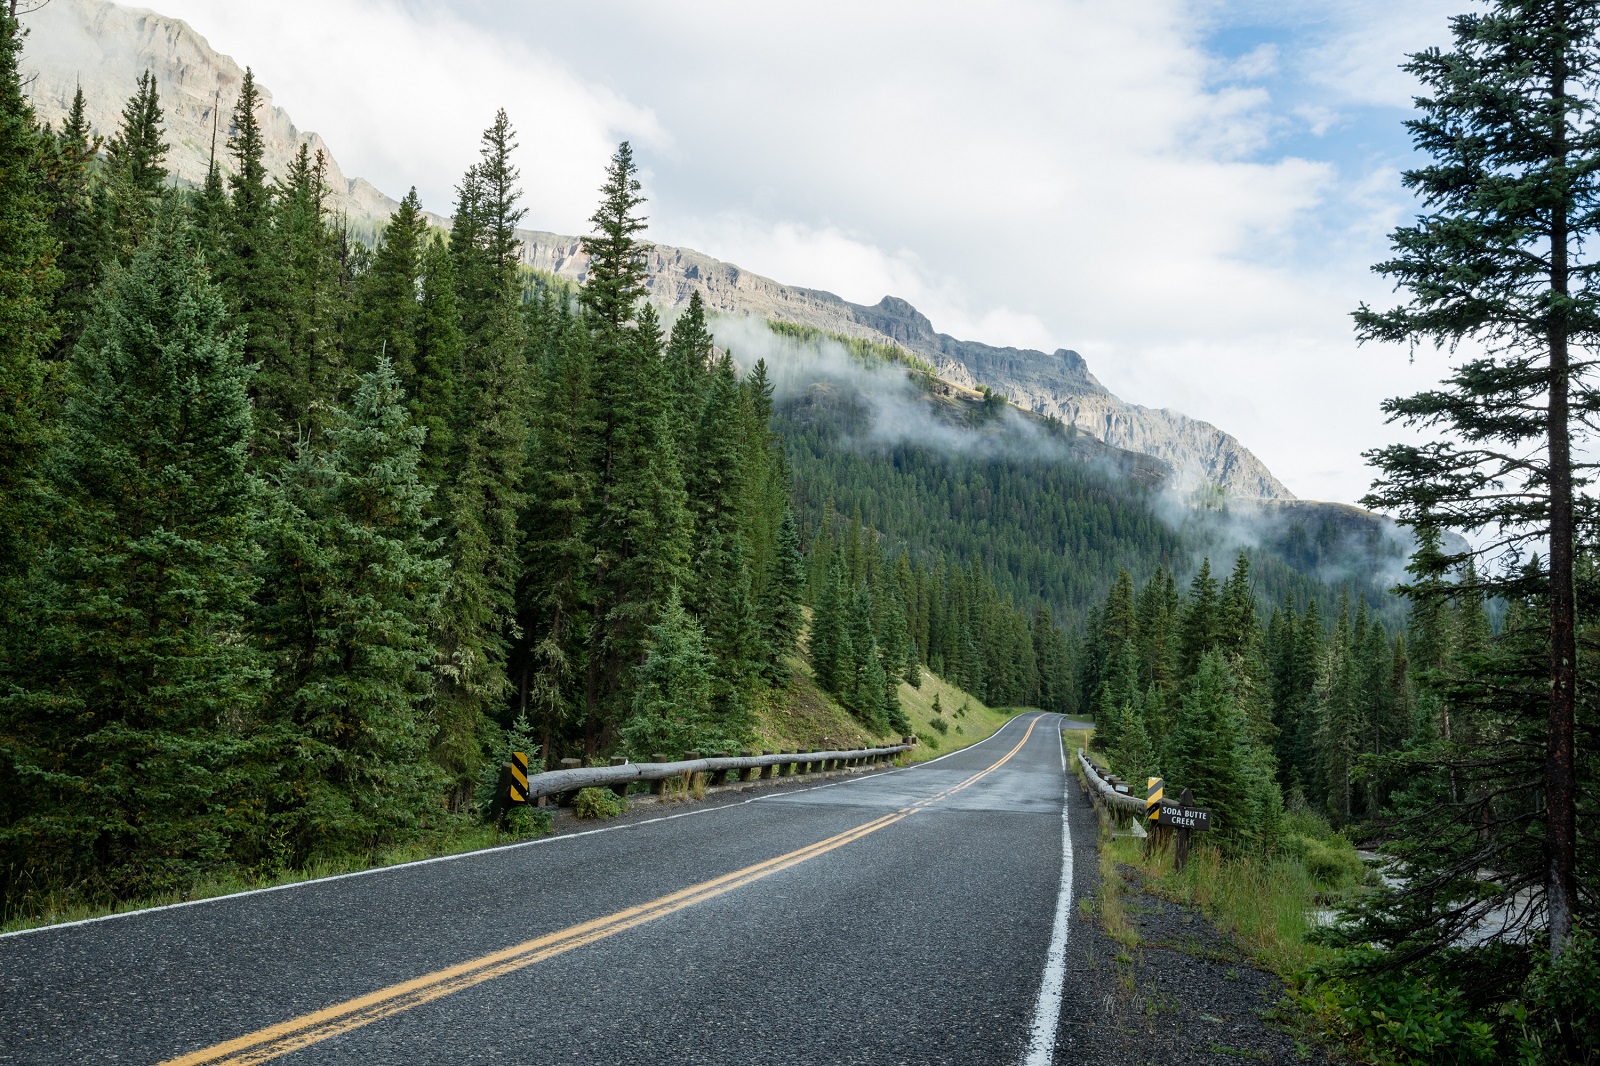 <p class="wp-caption-text">Image Credit: Shutterstock / Sam Spicer</p>  <p><span>Experience the thrill of high-altitude driving on the Beartooth Highway, a scenic route that climbs over the Beartooth Pass in Montana and Wyoming. With sweeping views of snow-capped peaks and alpine lakes, it’s a road trip that will take your breath away.</span></p>